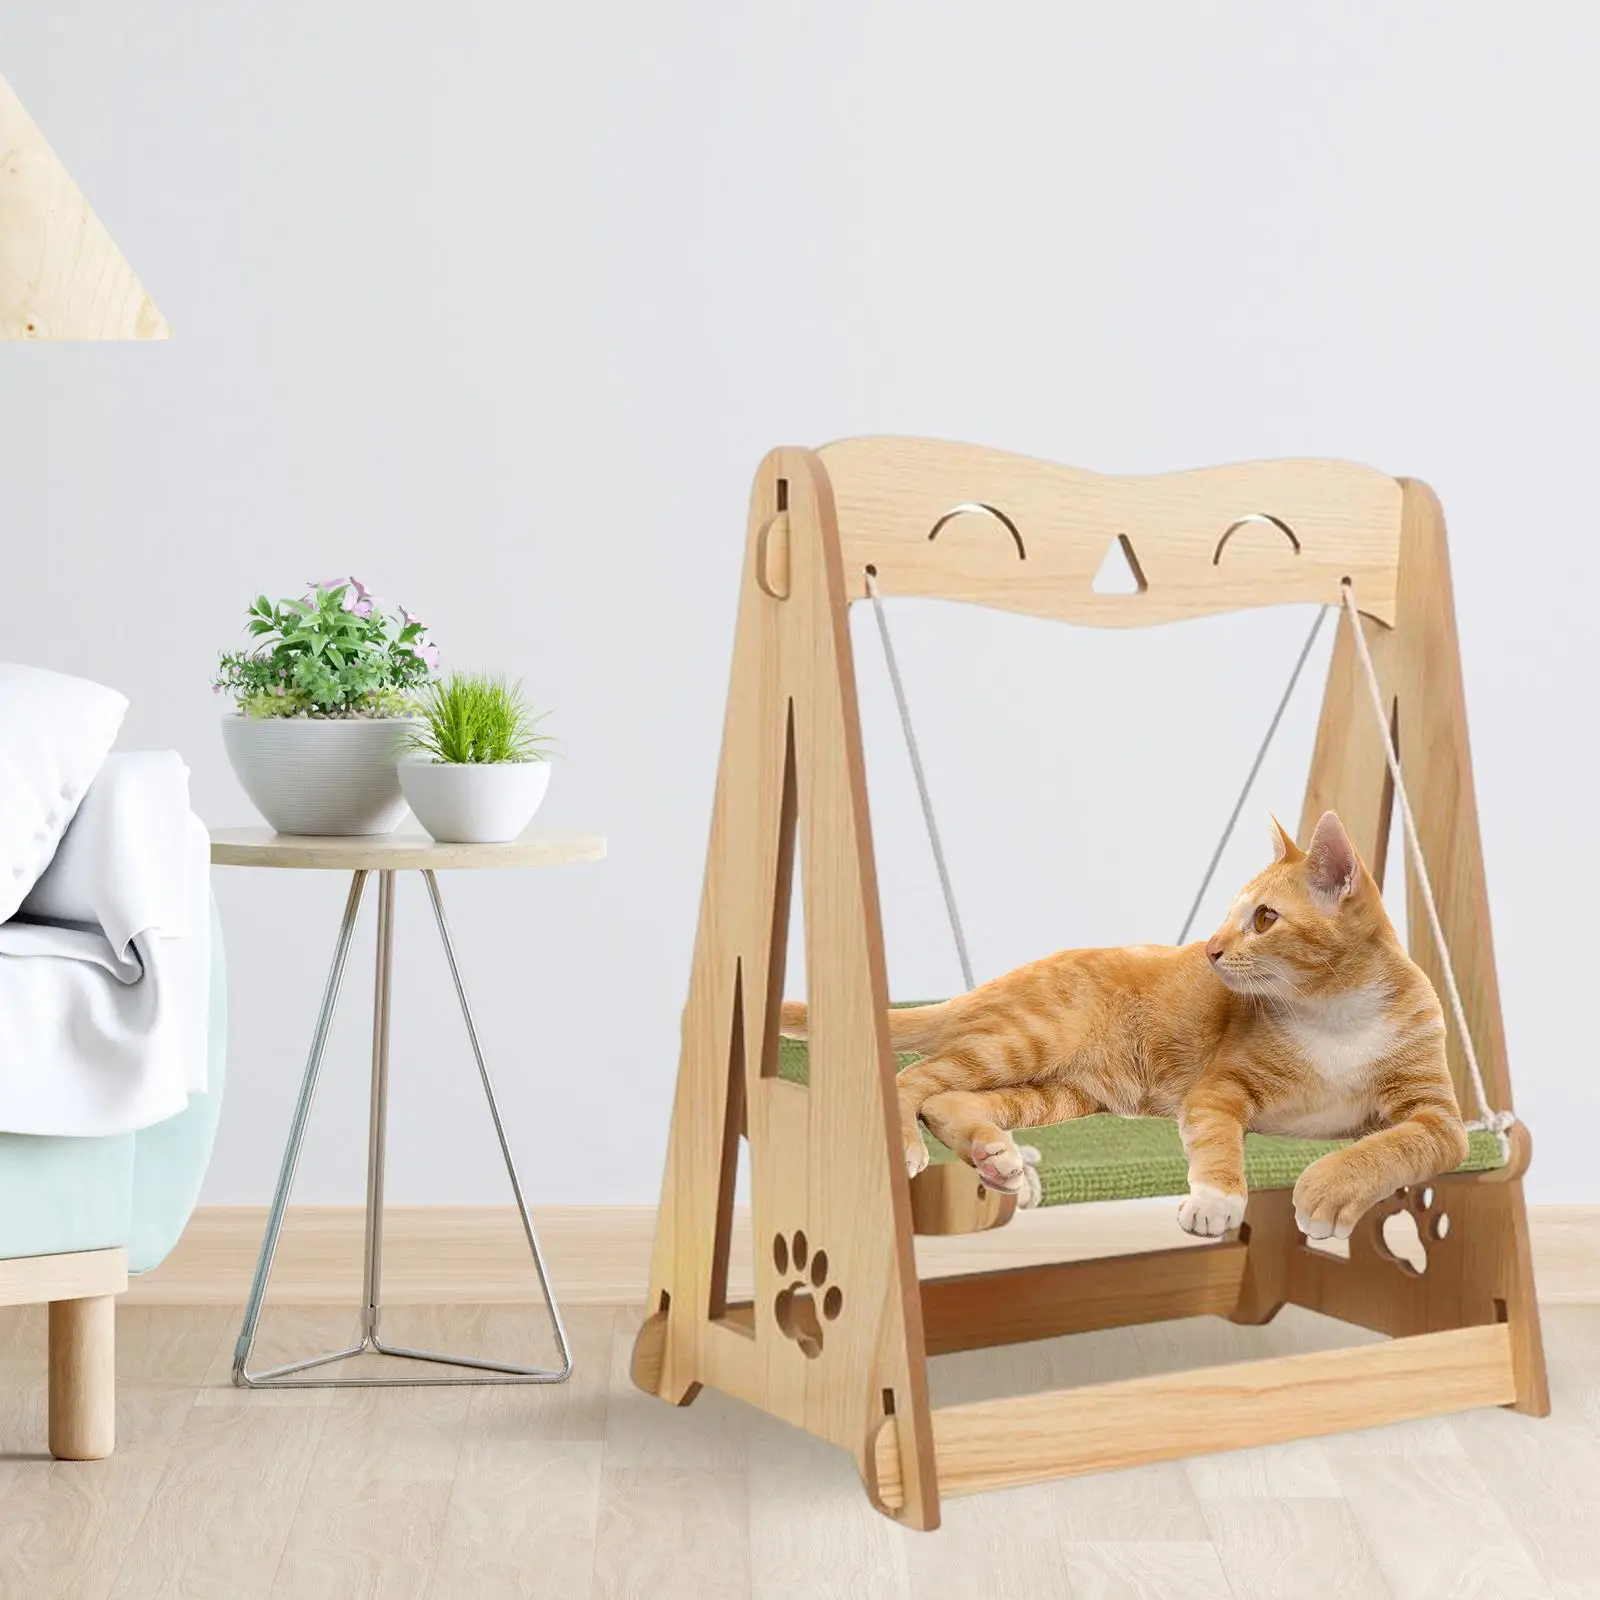 Cat Hammock Cat Bed Pet Hanging Swing Activity Toy for Cats and Small Dogs Easy